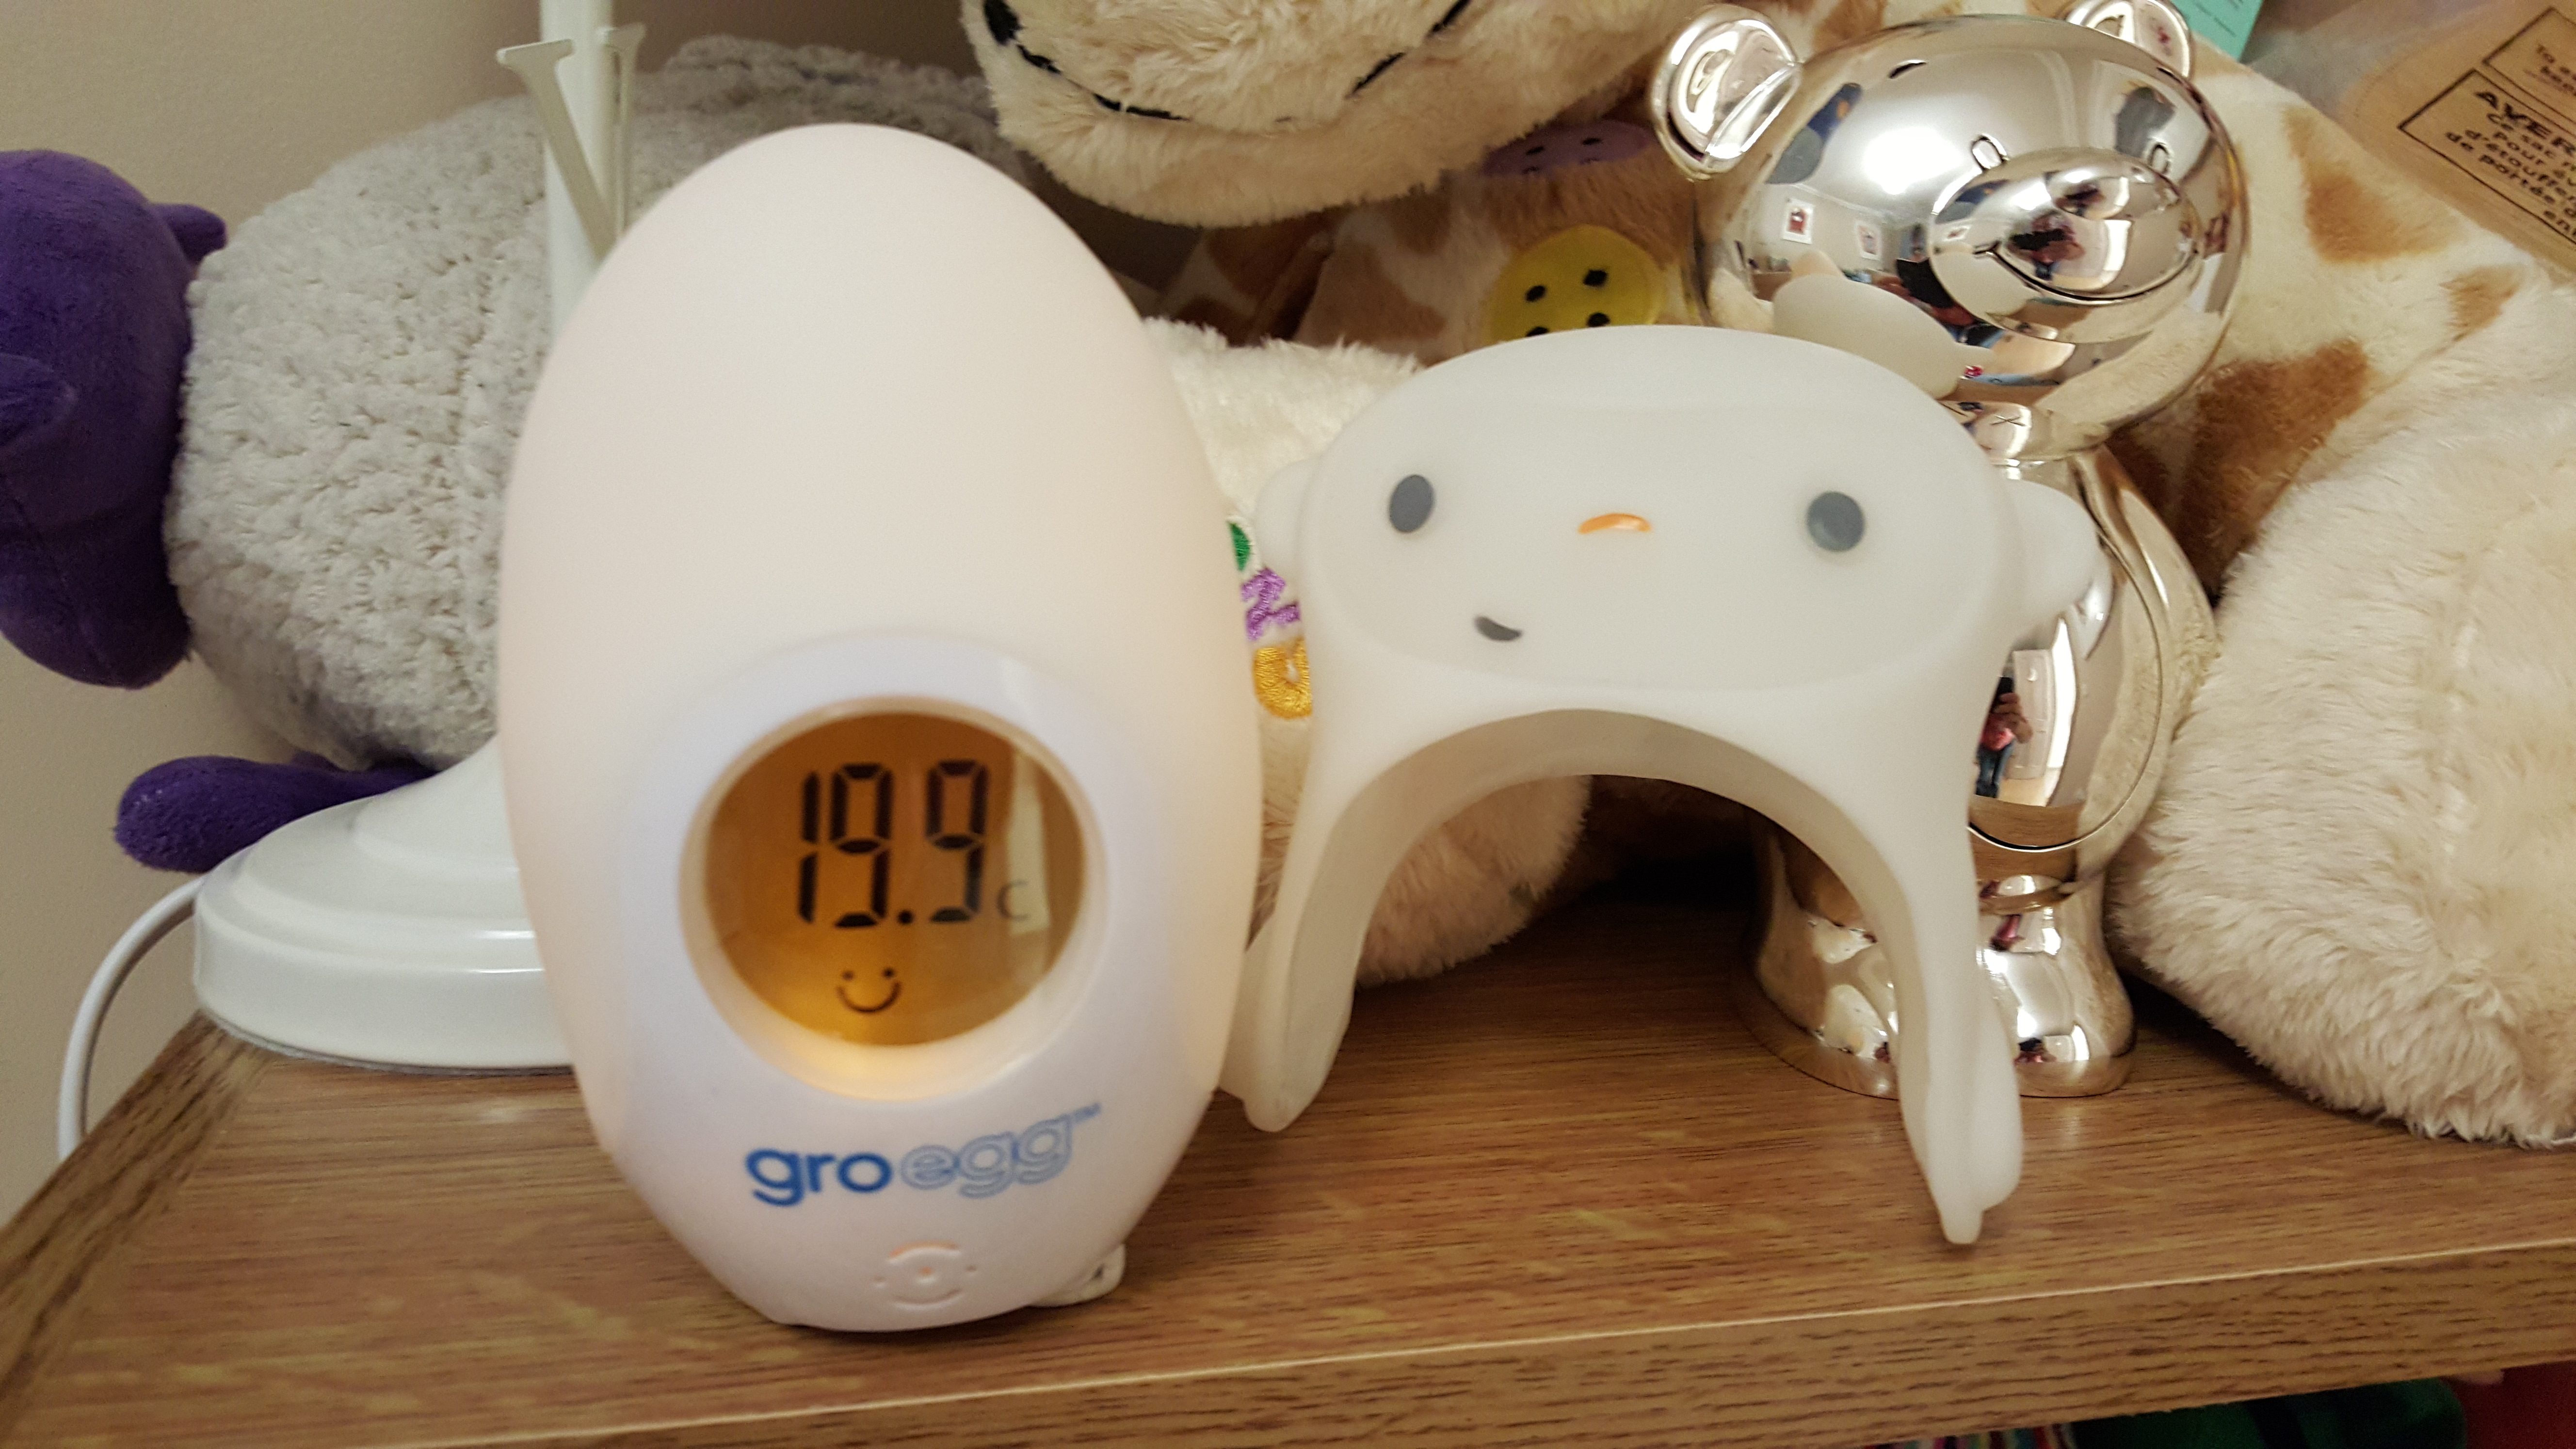 Gro Company Groegg2 review - Nightlights & bedtime accessories - Cots,  night-time & nursery